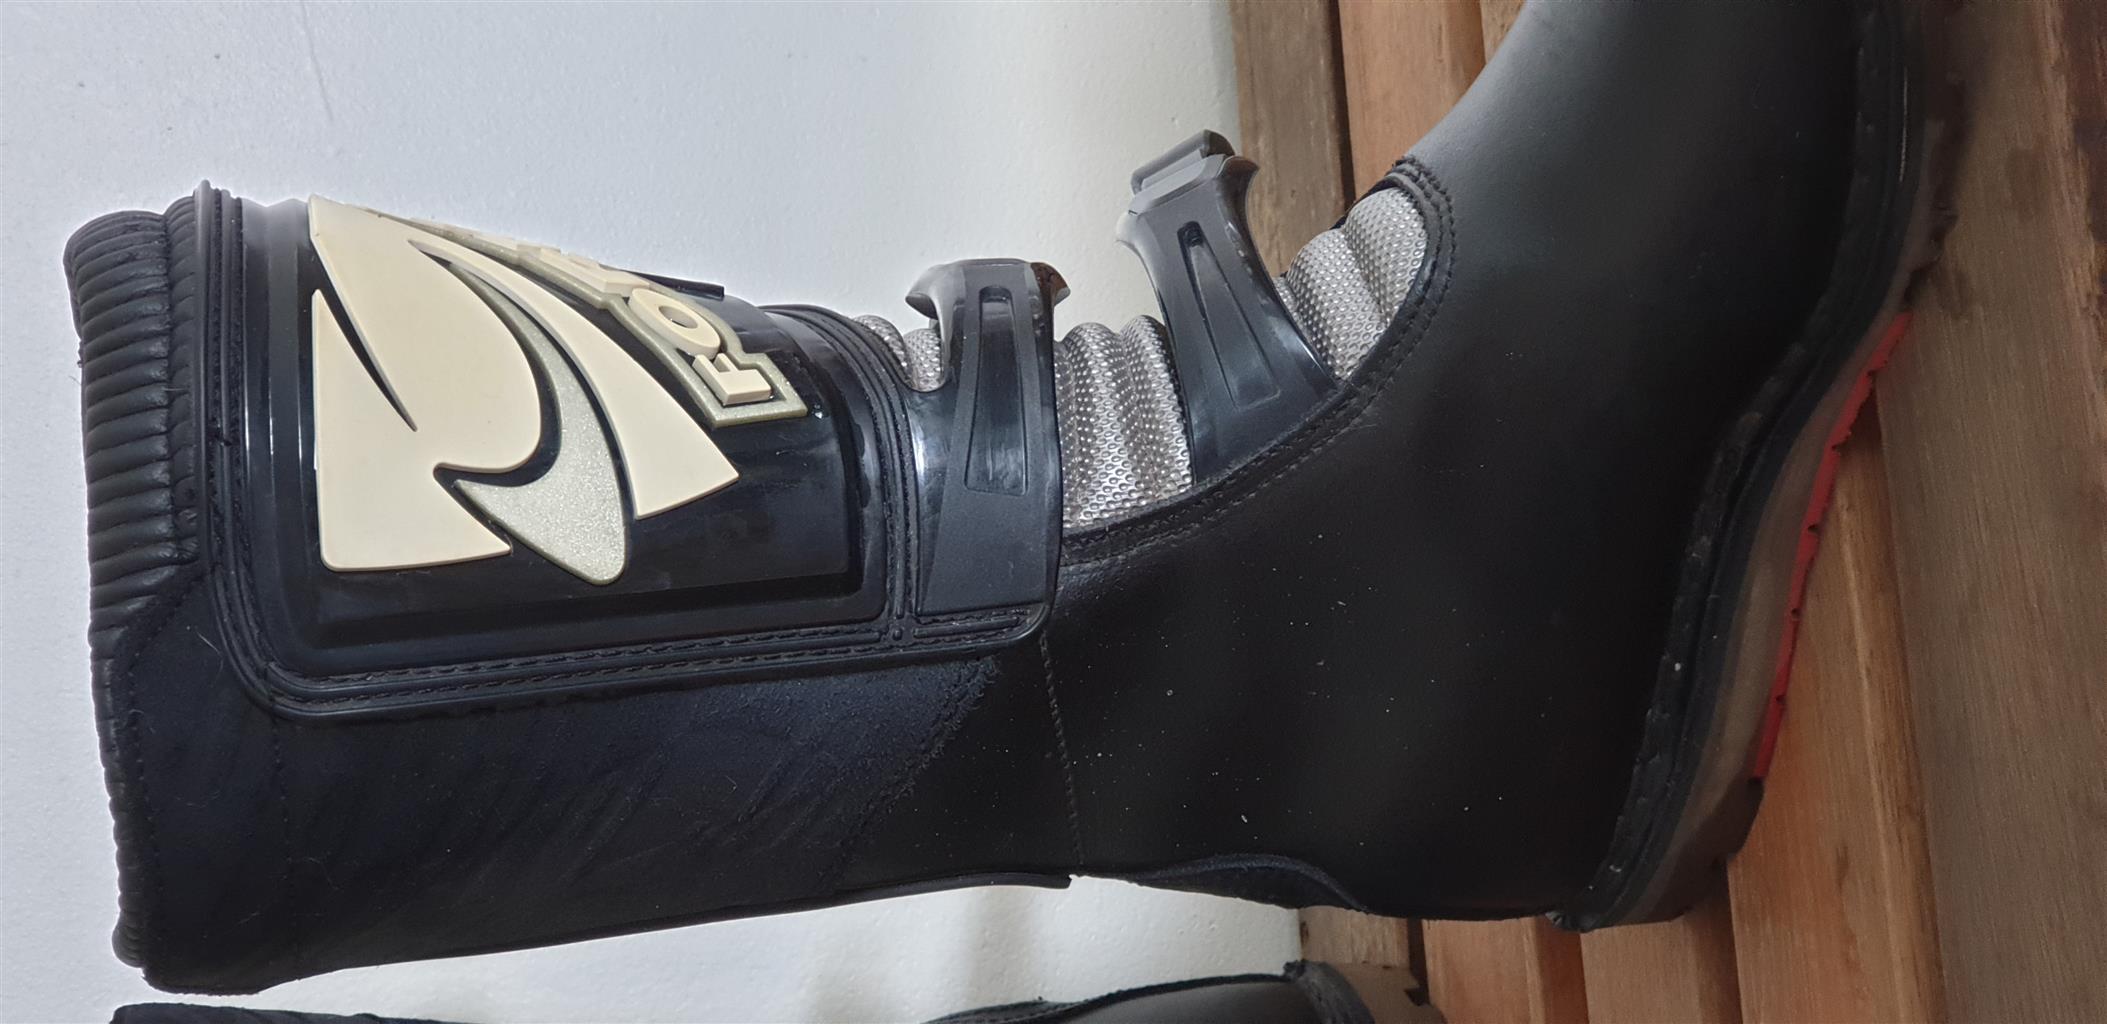 Motorcycle Gear Boots